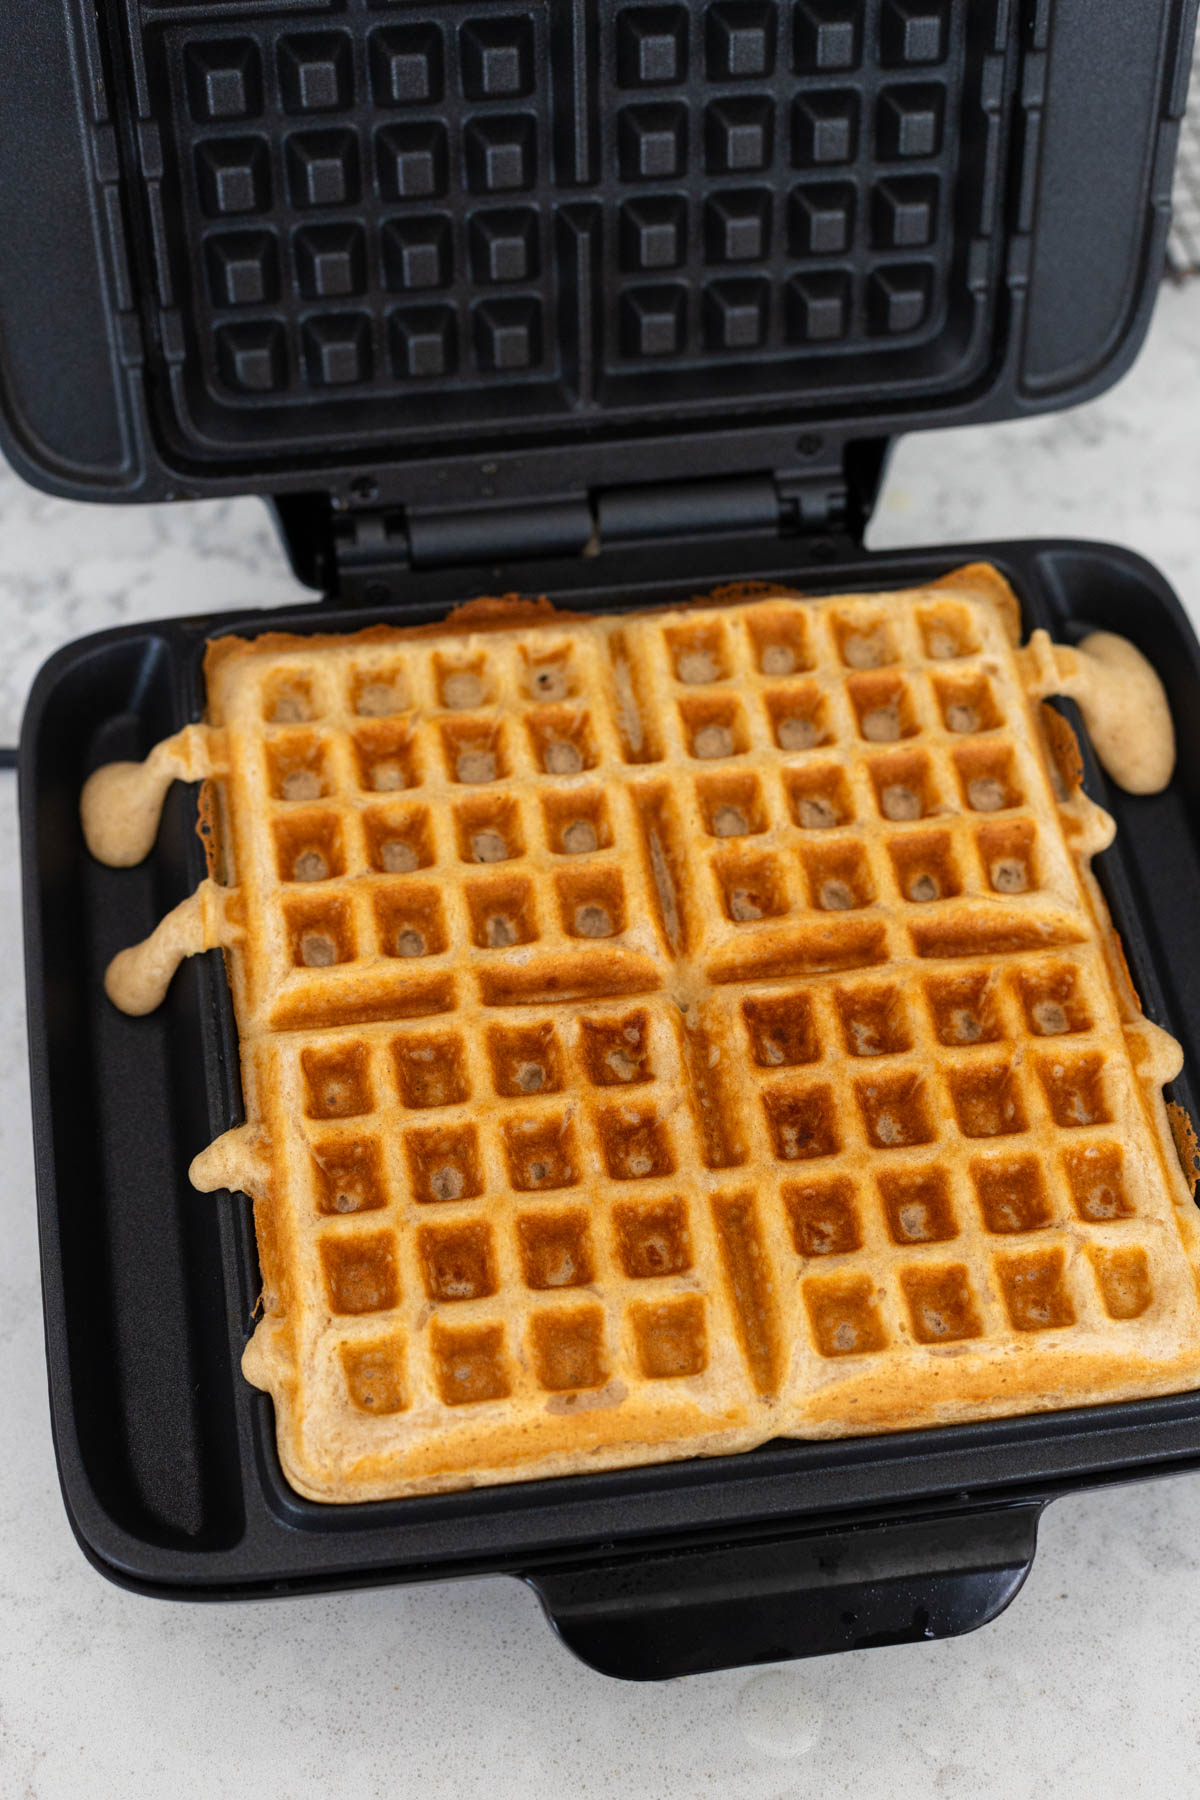 4 buttermilk waffles are now golden brown in the waffle maker.